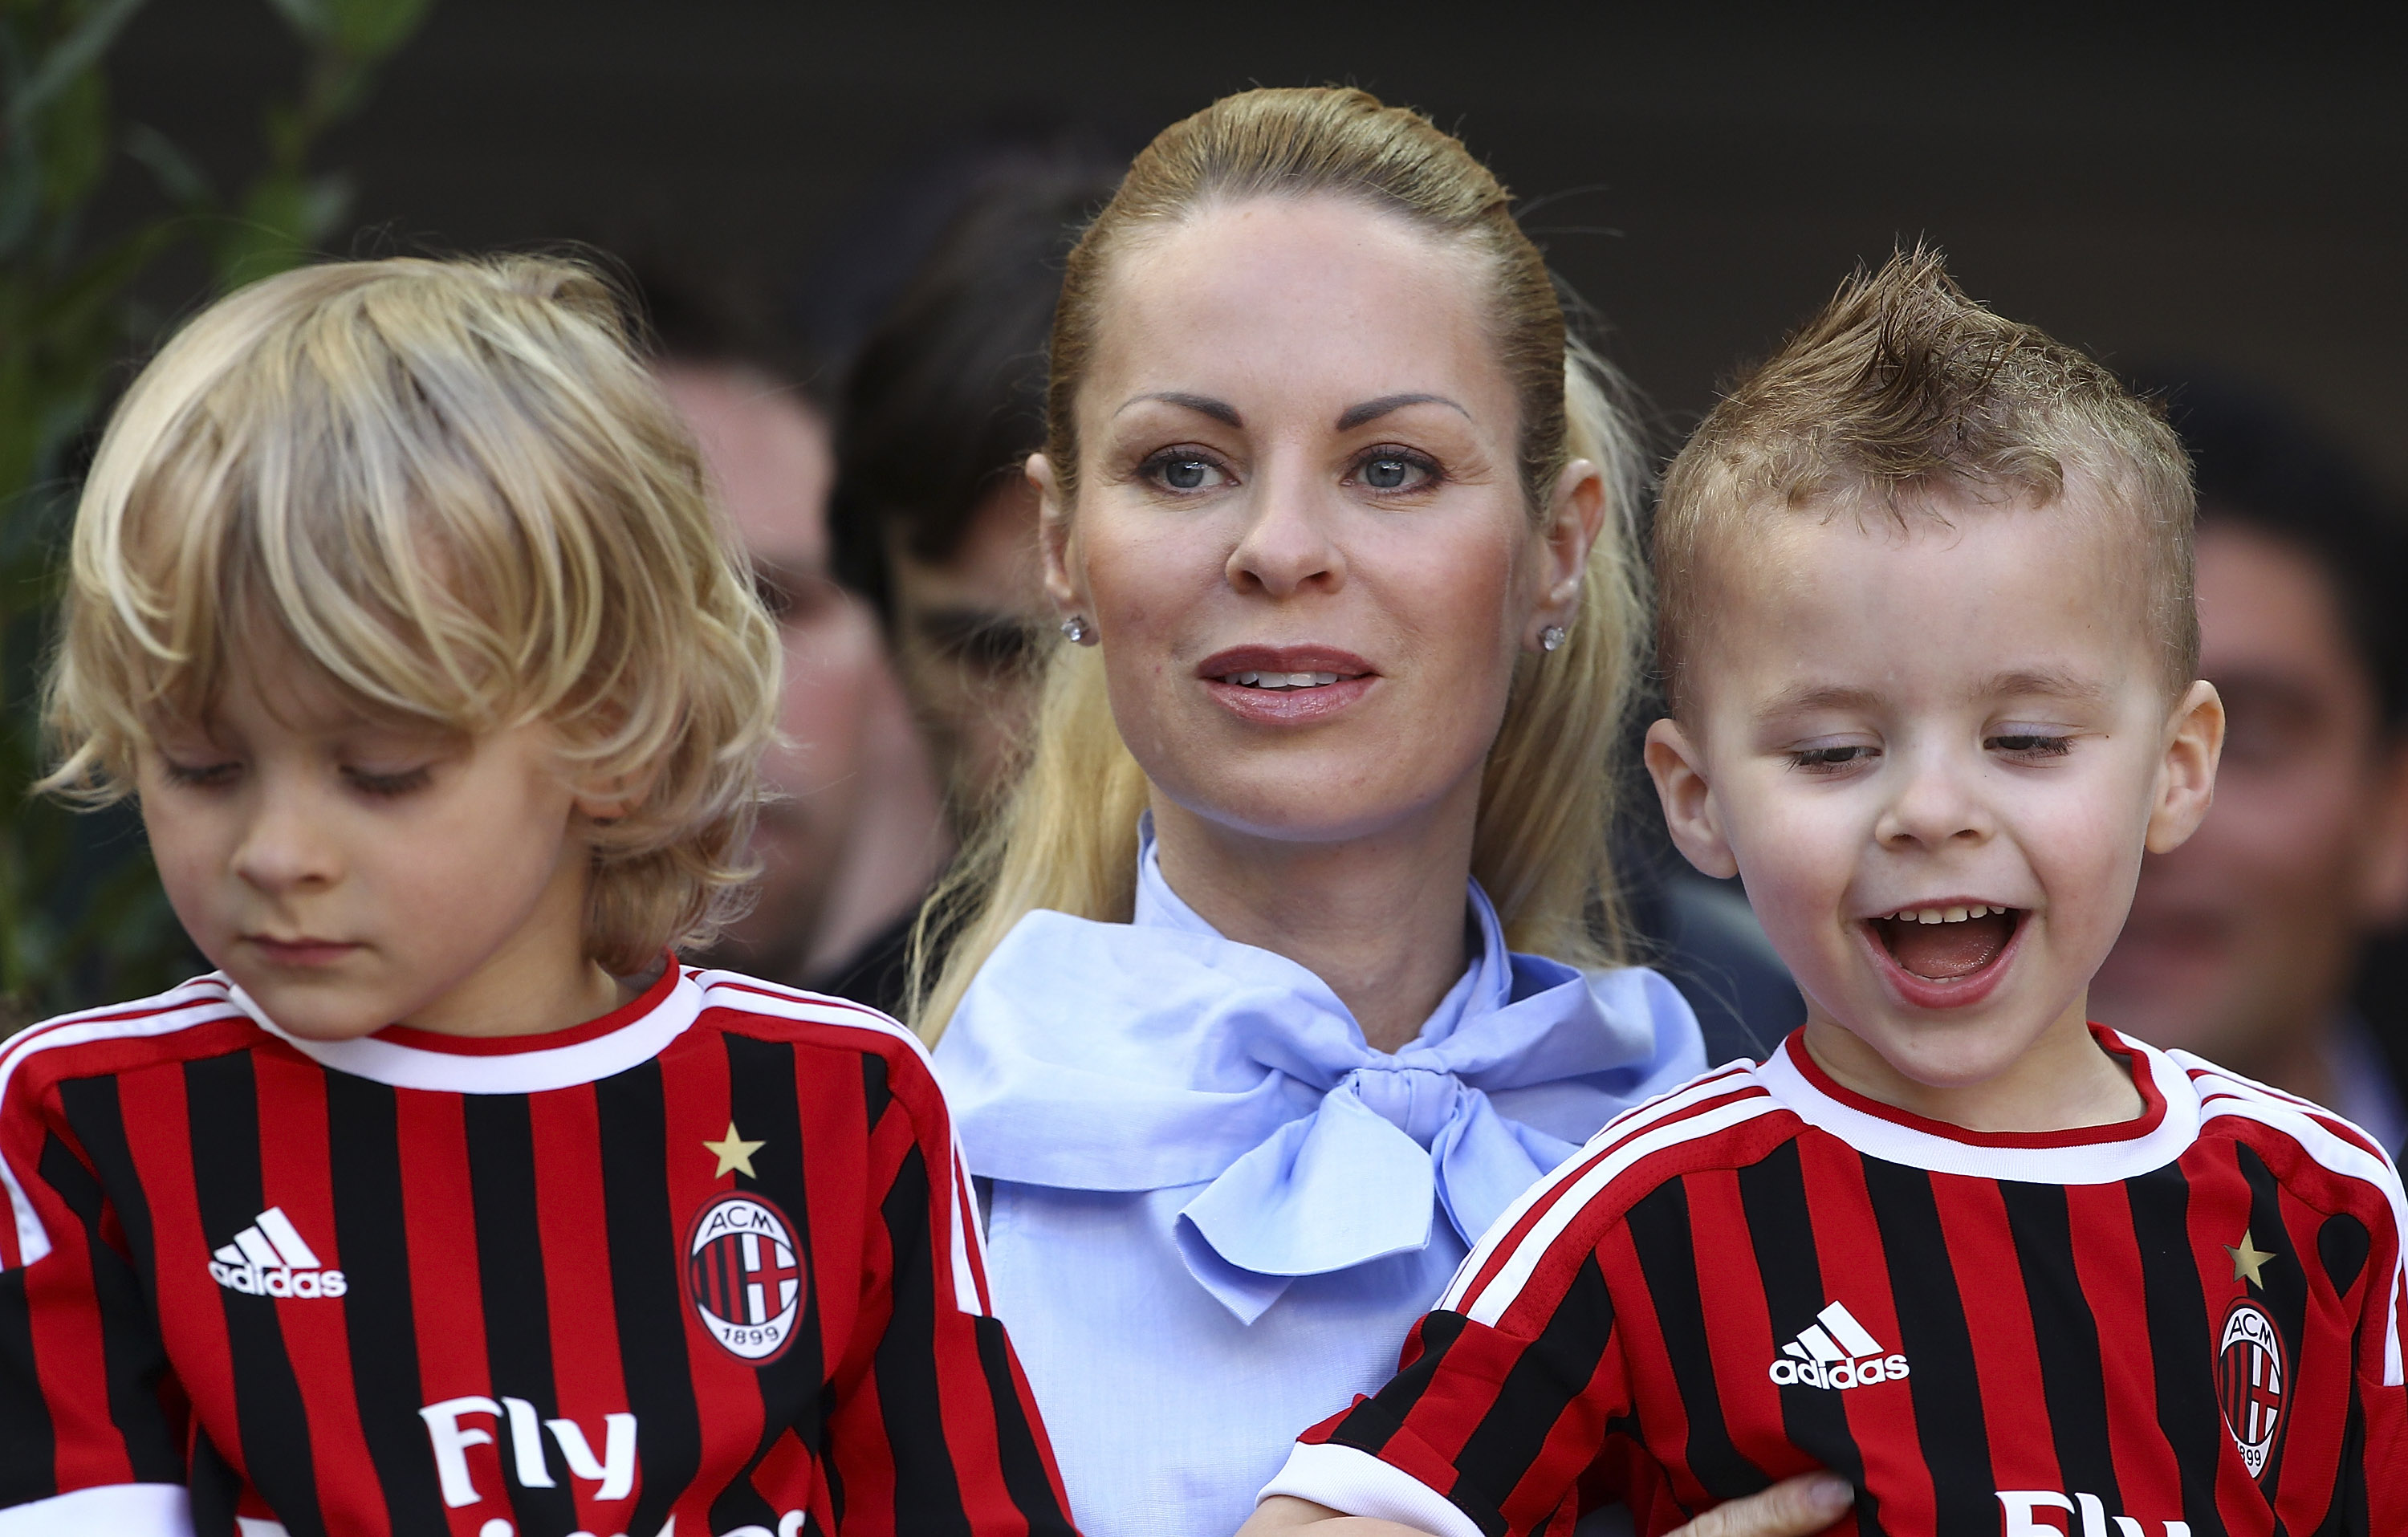 Helena Seger and her children, Maximilian and Vincent Ibrahimović, attended the Serie A match between AC Milan and Genoa CFC at Stadio Giuseppe Meazza on April 25, 2012, in Milan, Italy. | Source: Getty Images